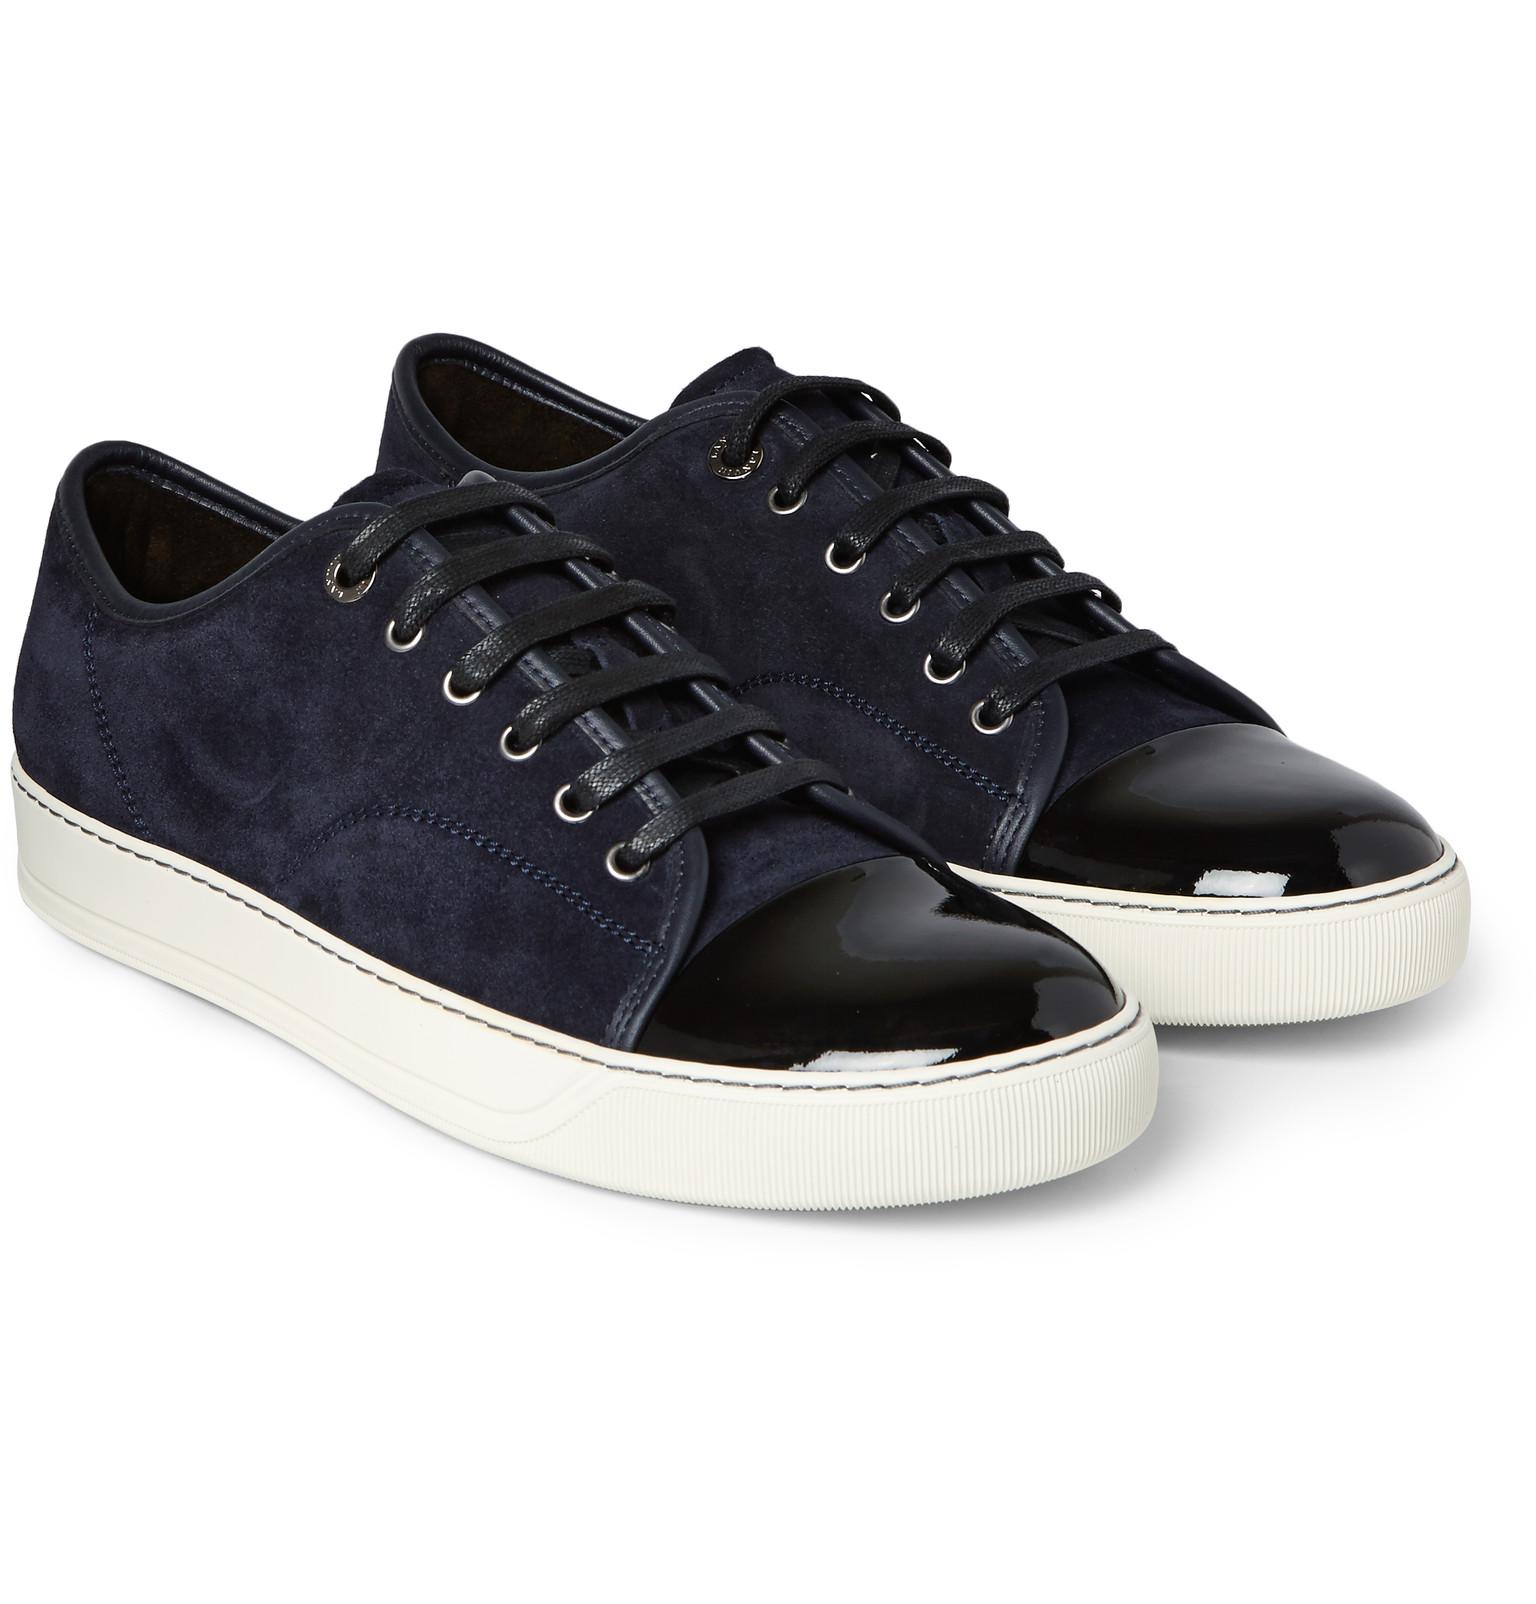 Lanvin Cap-toe Suede And Patent-leather Sneakers in Midnight Blue (Blue)  for Men - Lyst